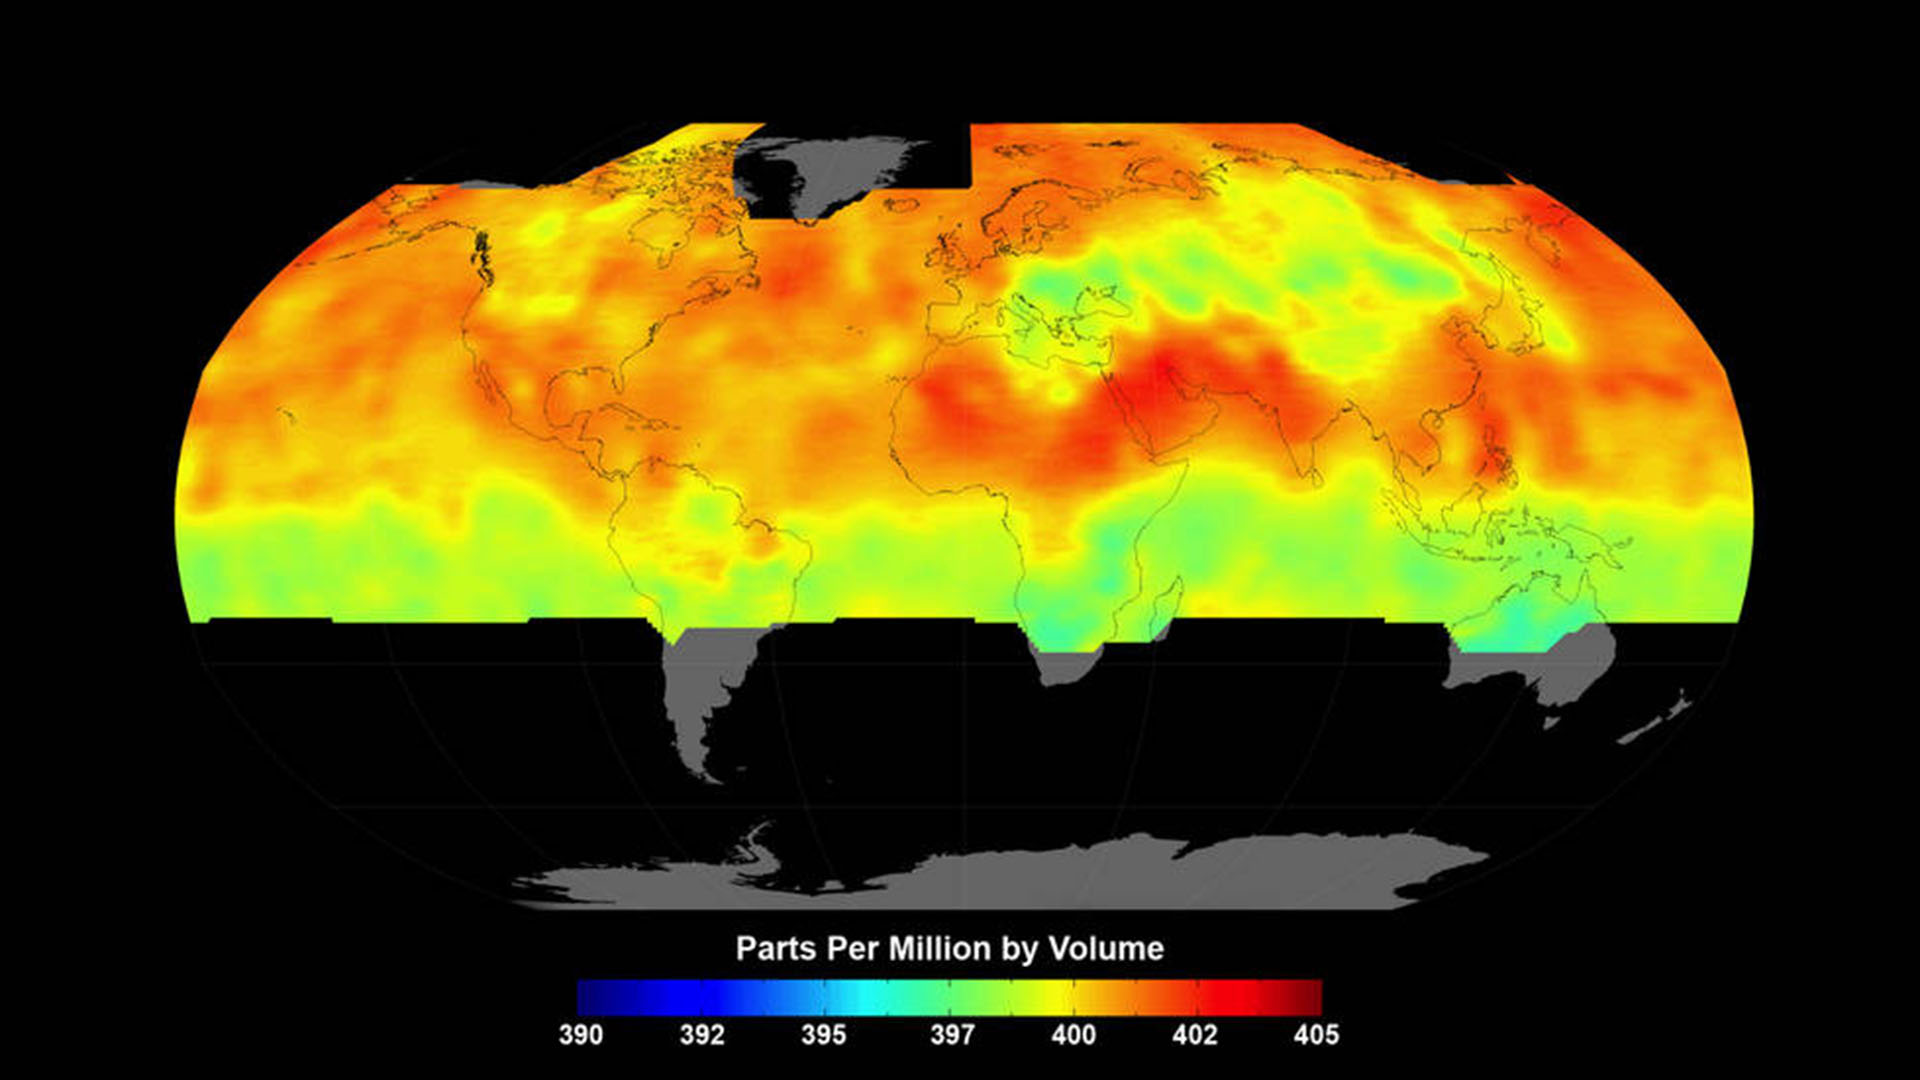 Global average carbon dioxide concentrations as seen by NASA’s Orbiting Carbon Observatory-2 mission, June 1-15, 2015.